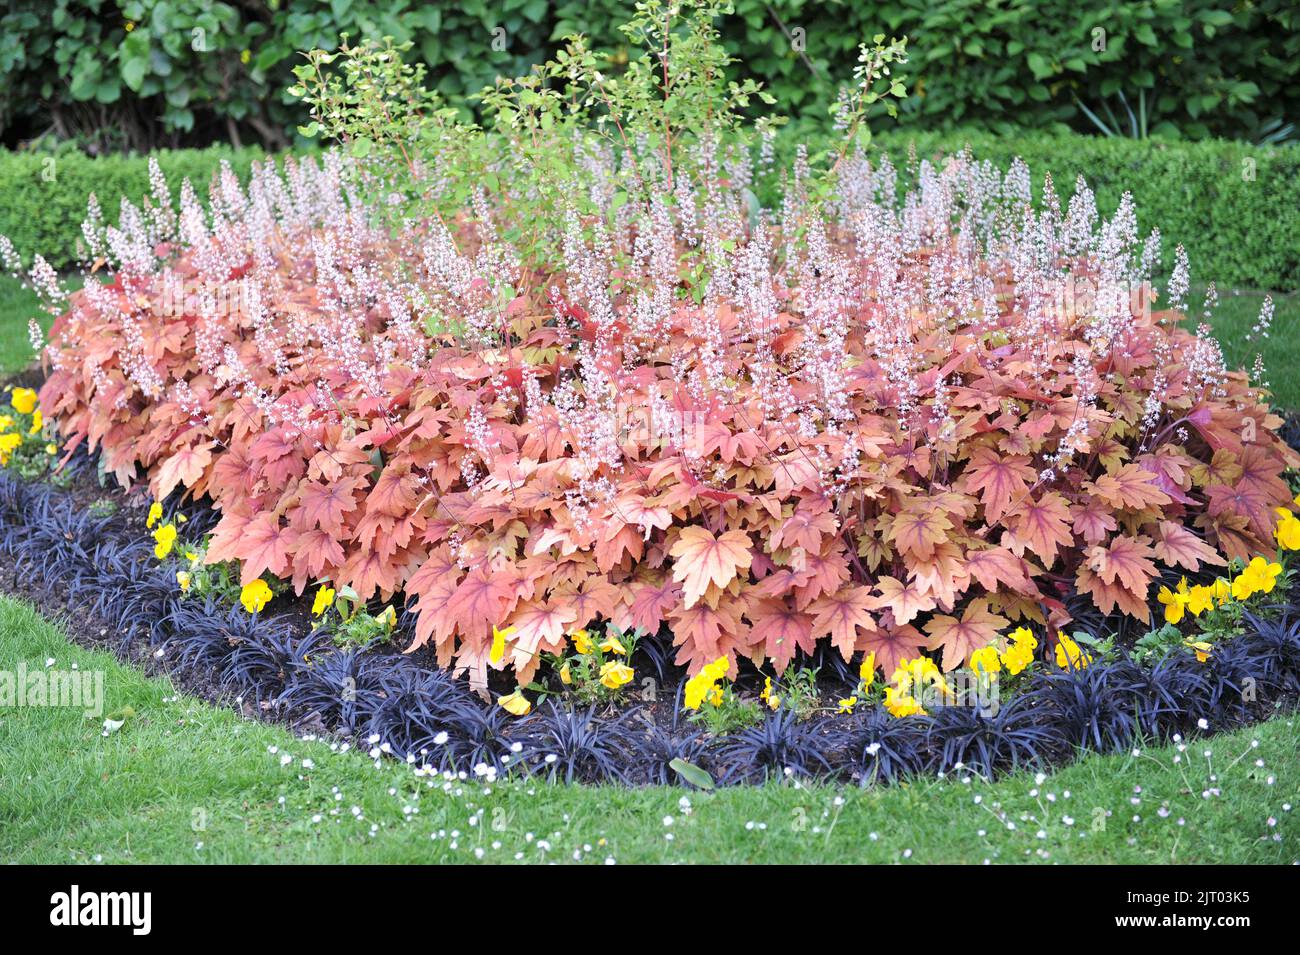 A flower bed in a garden with Heuchera and black Ophiopogon planiscapus Nigrescens in May Stock Photo